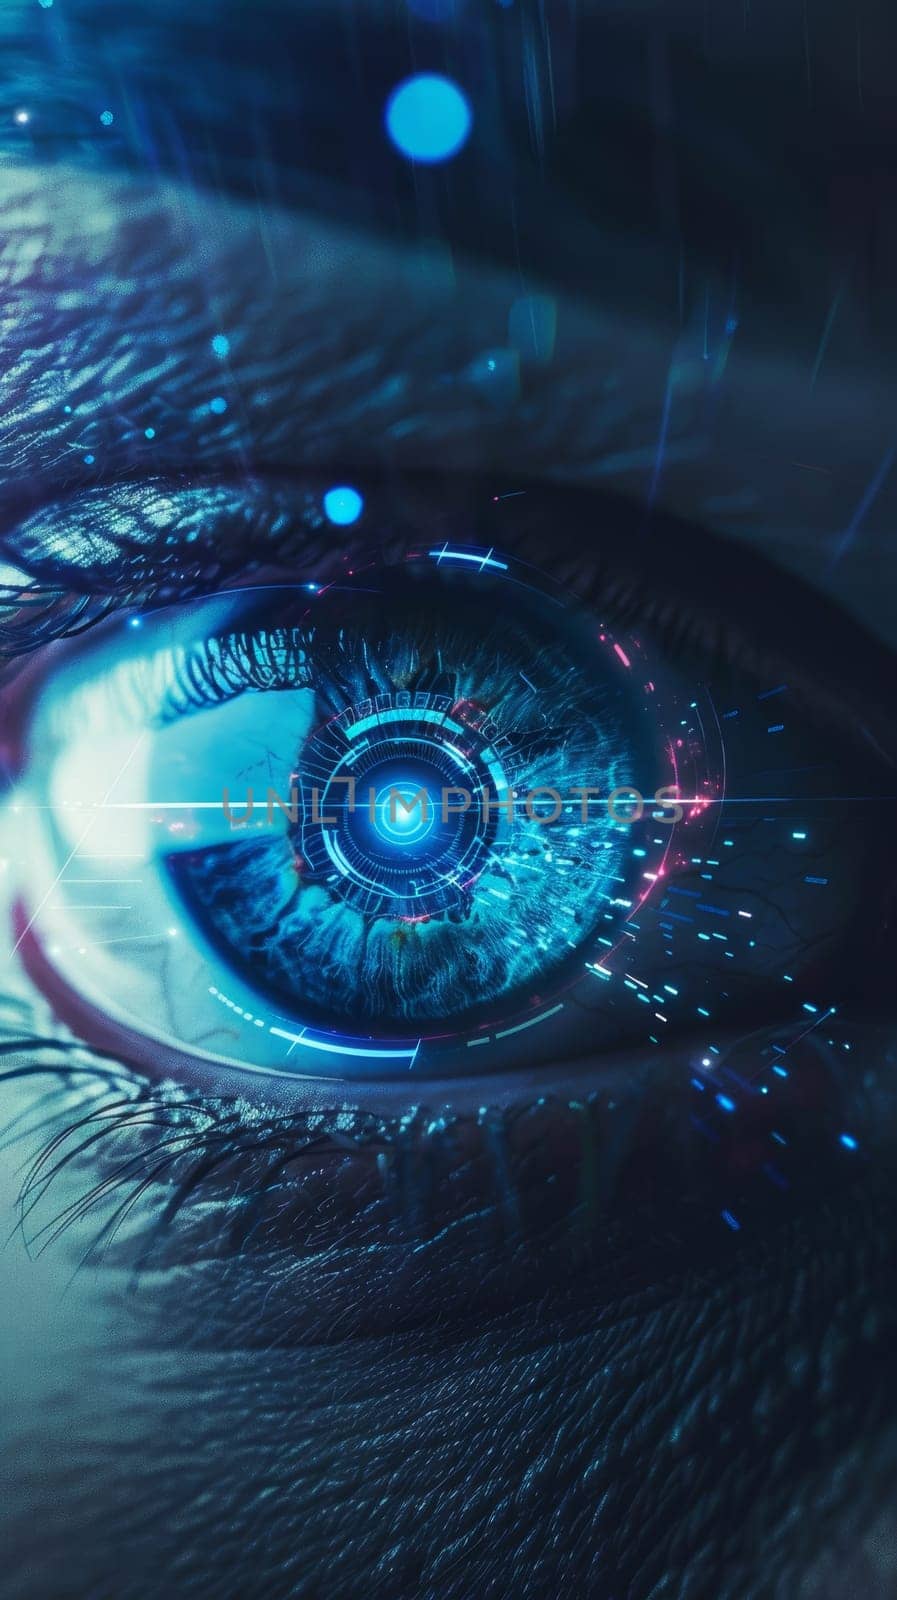 A close-up image of a human eye with a digital interface overlay, depicting futuristic biometric technology. by sfinks